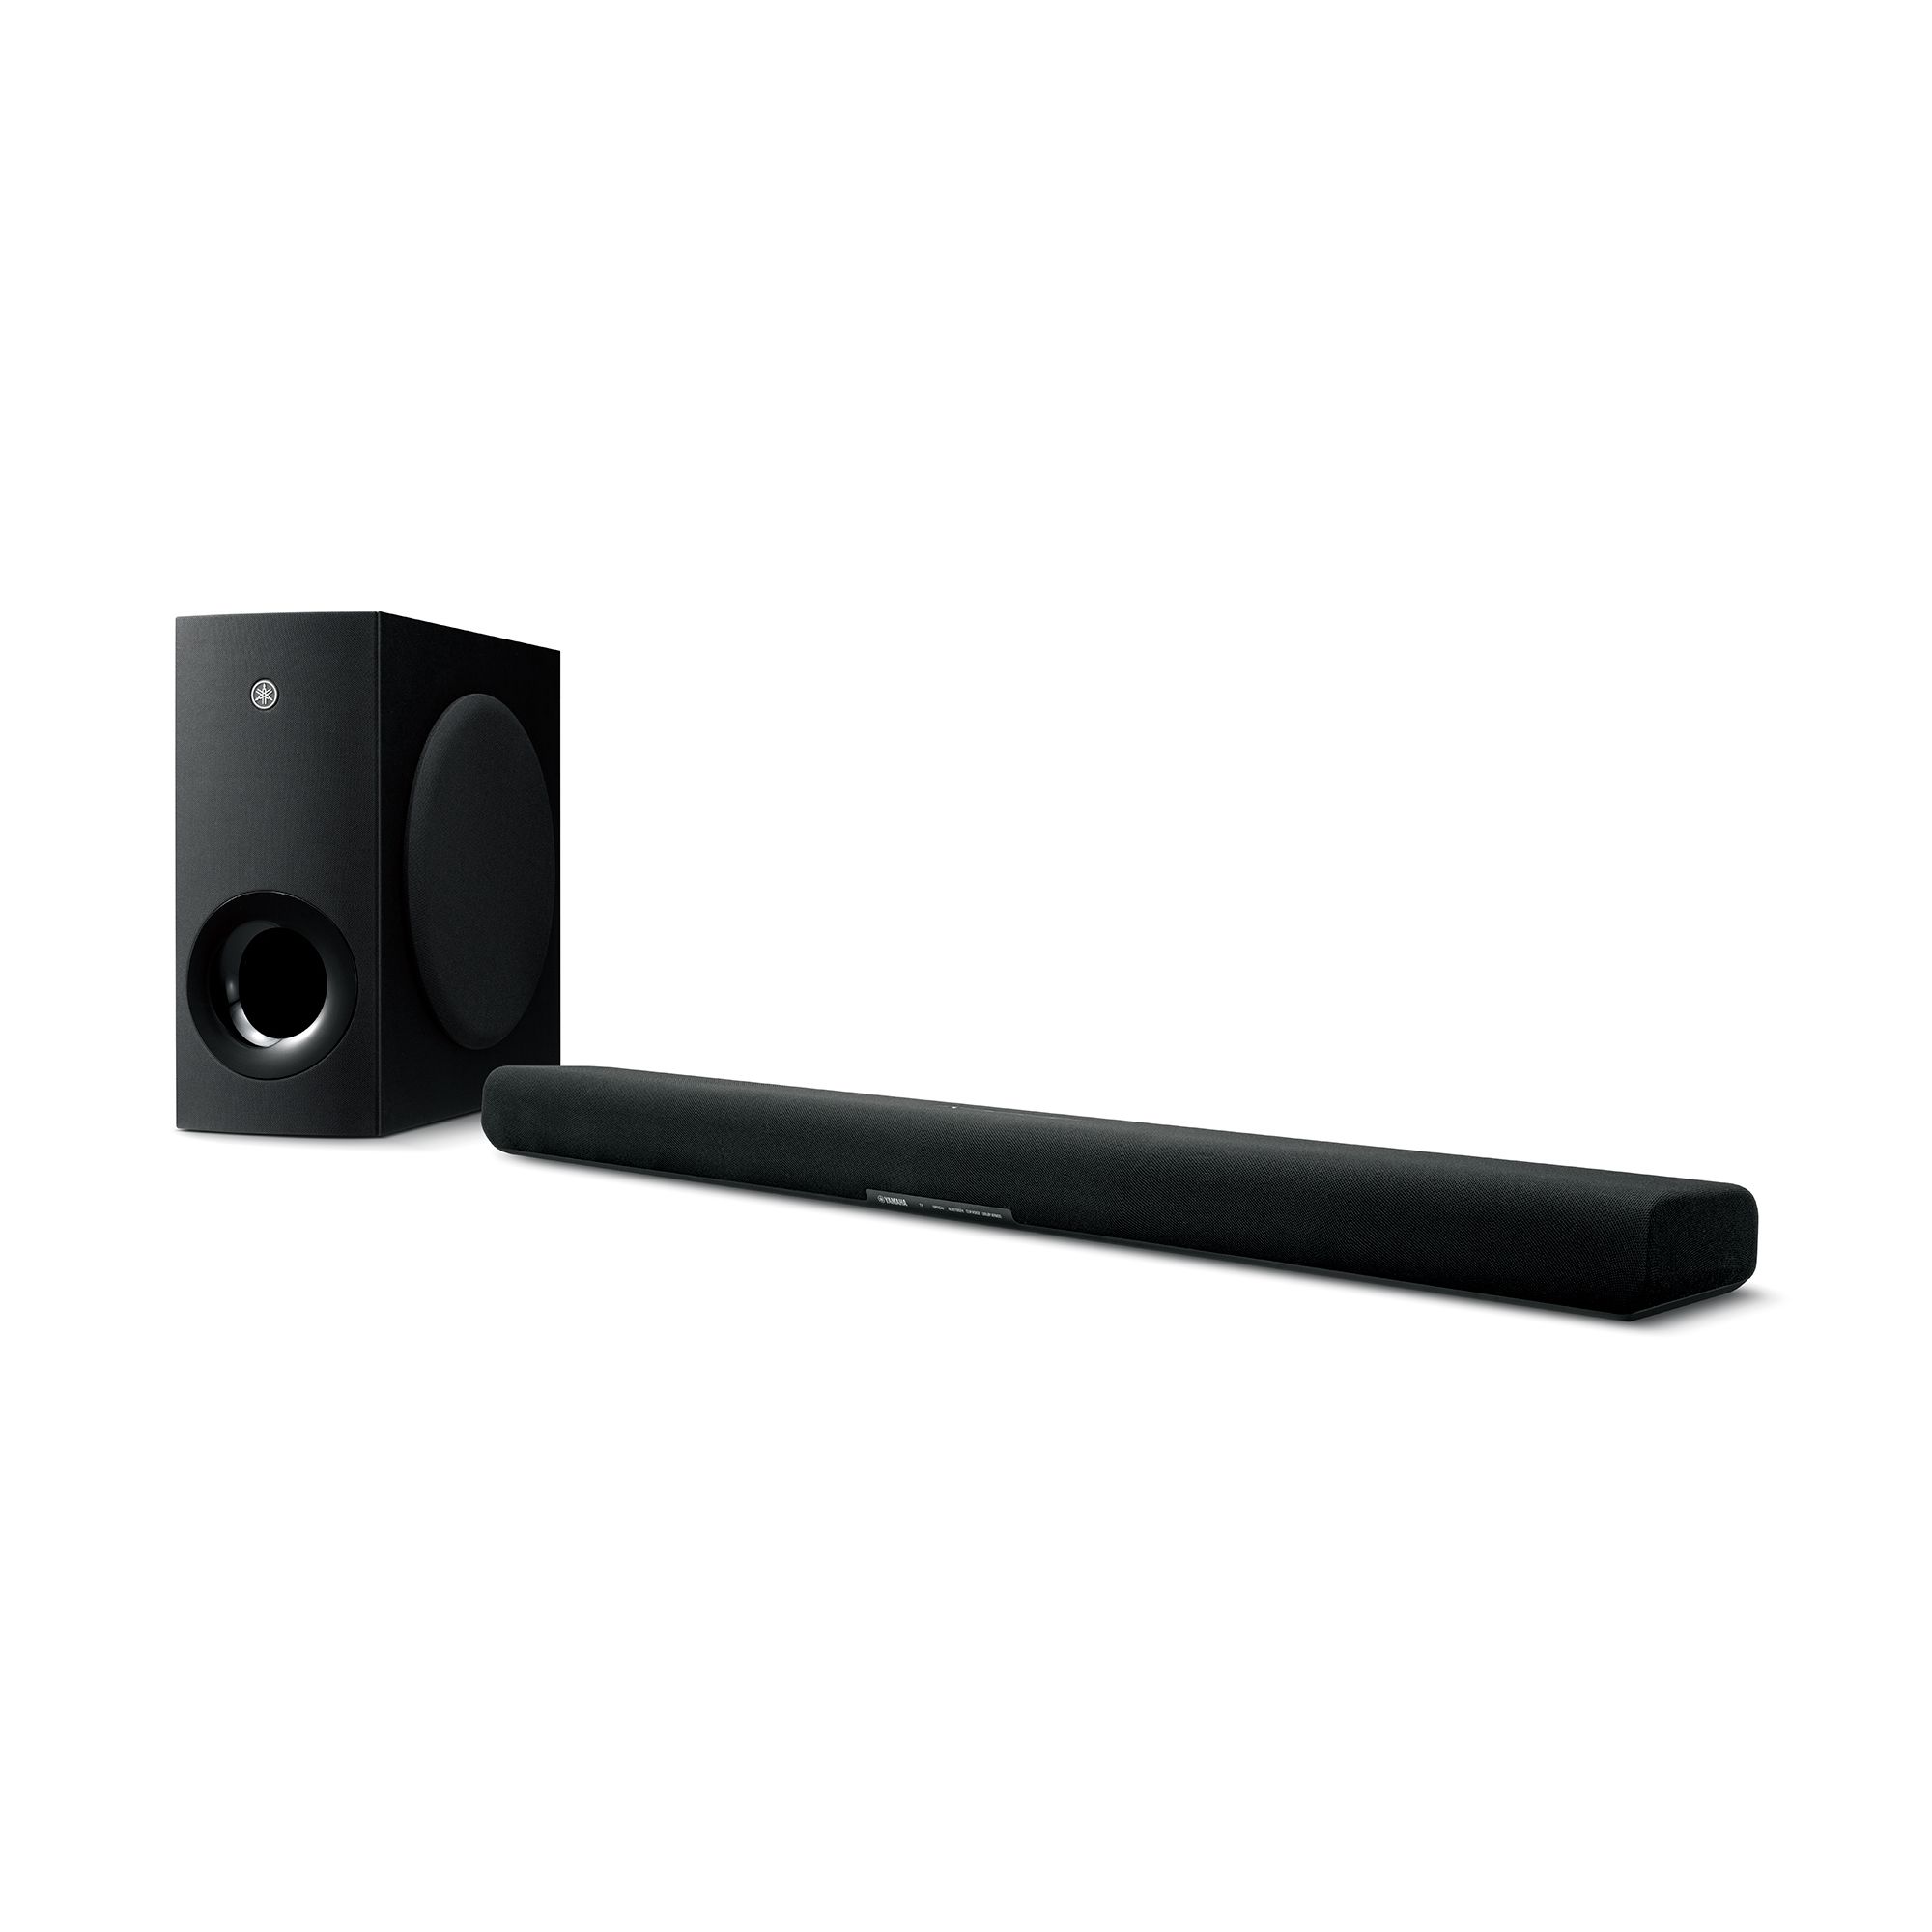 SR-B40A - Overview - Sound Bars - Audio & Visual - Products - Yamaha -  Other European Countries